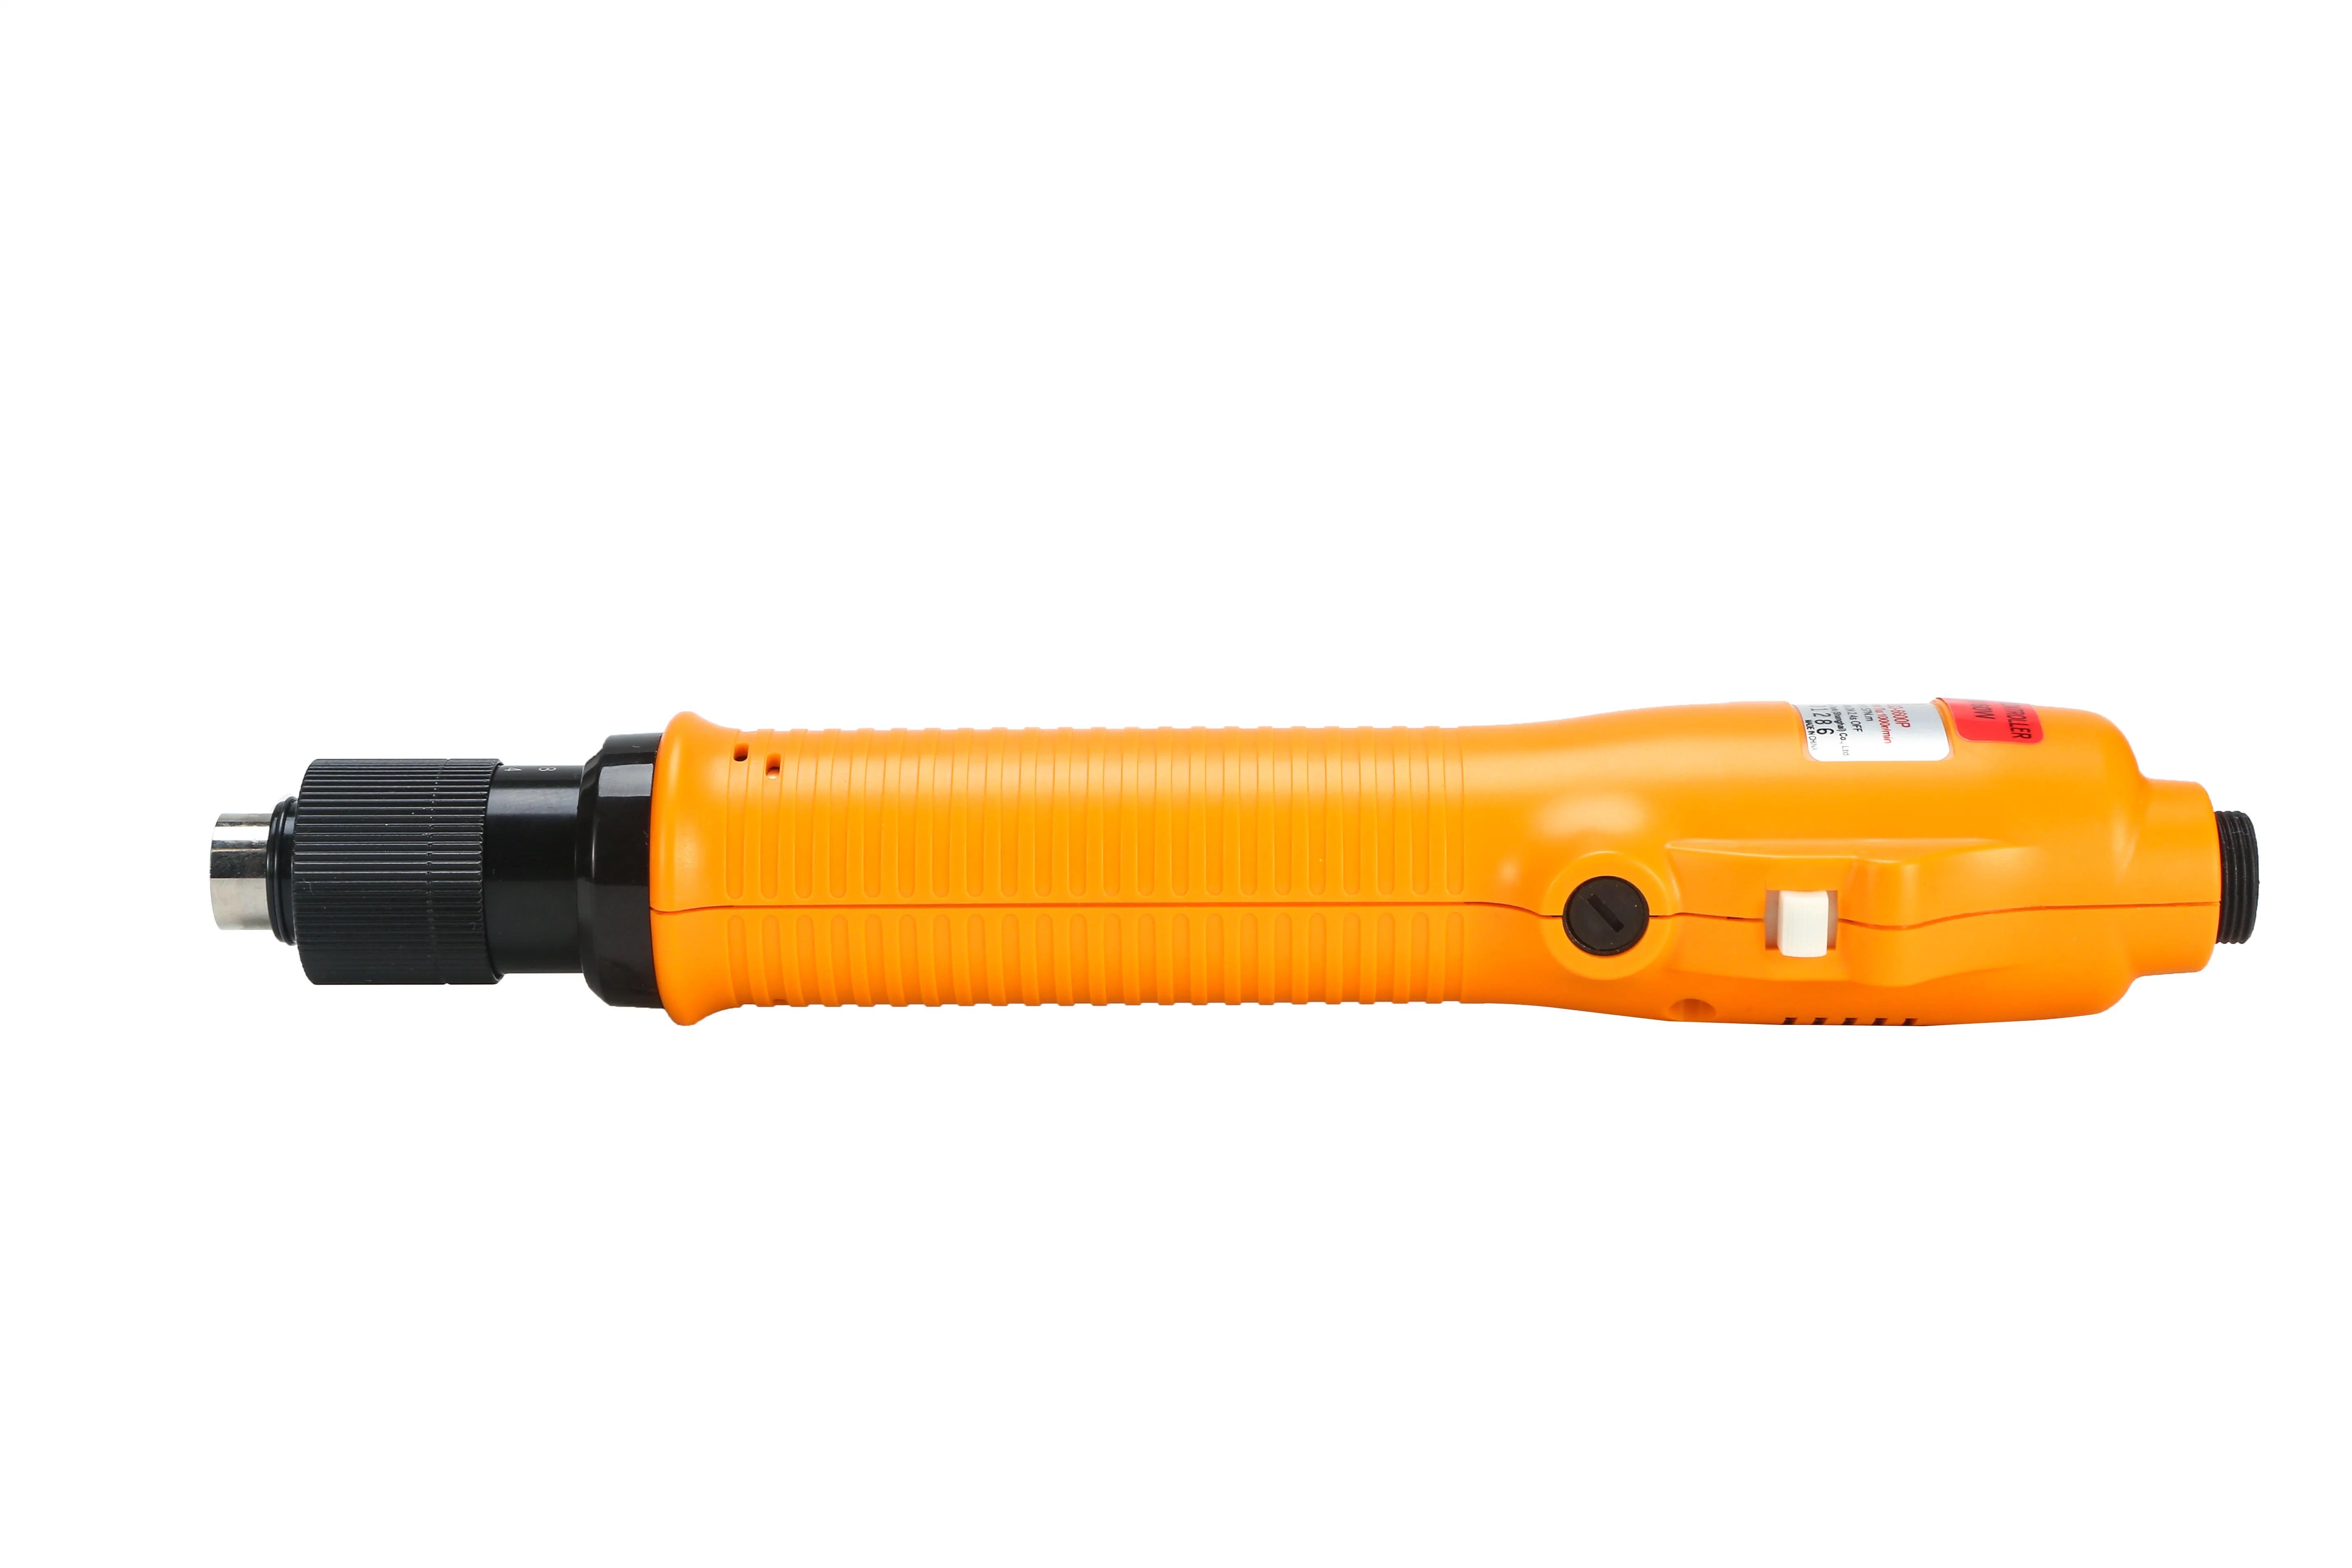 Bsd-6200p Kilews Torque Precision Fully Automatic Electric Screwdriver for Production Line, Production Tools, Shut off Clutch